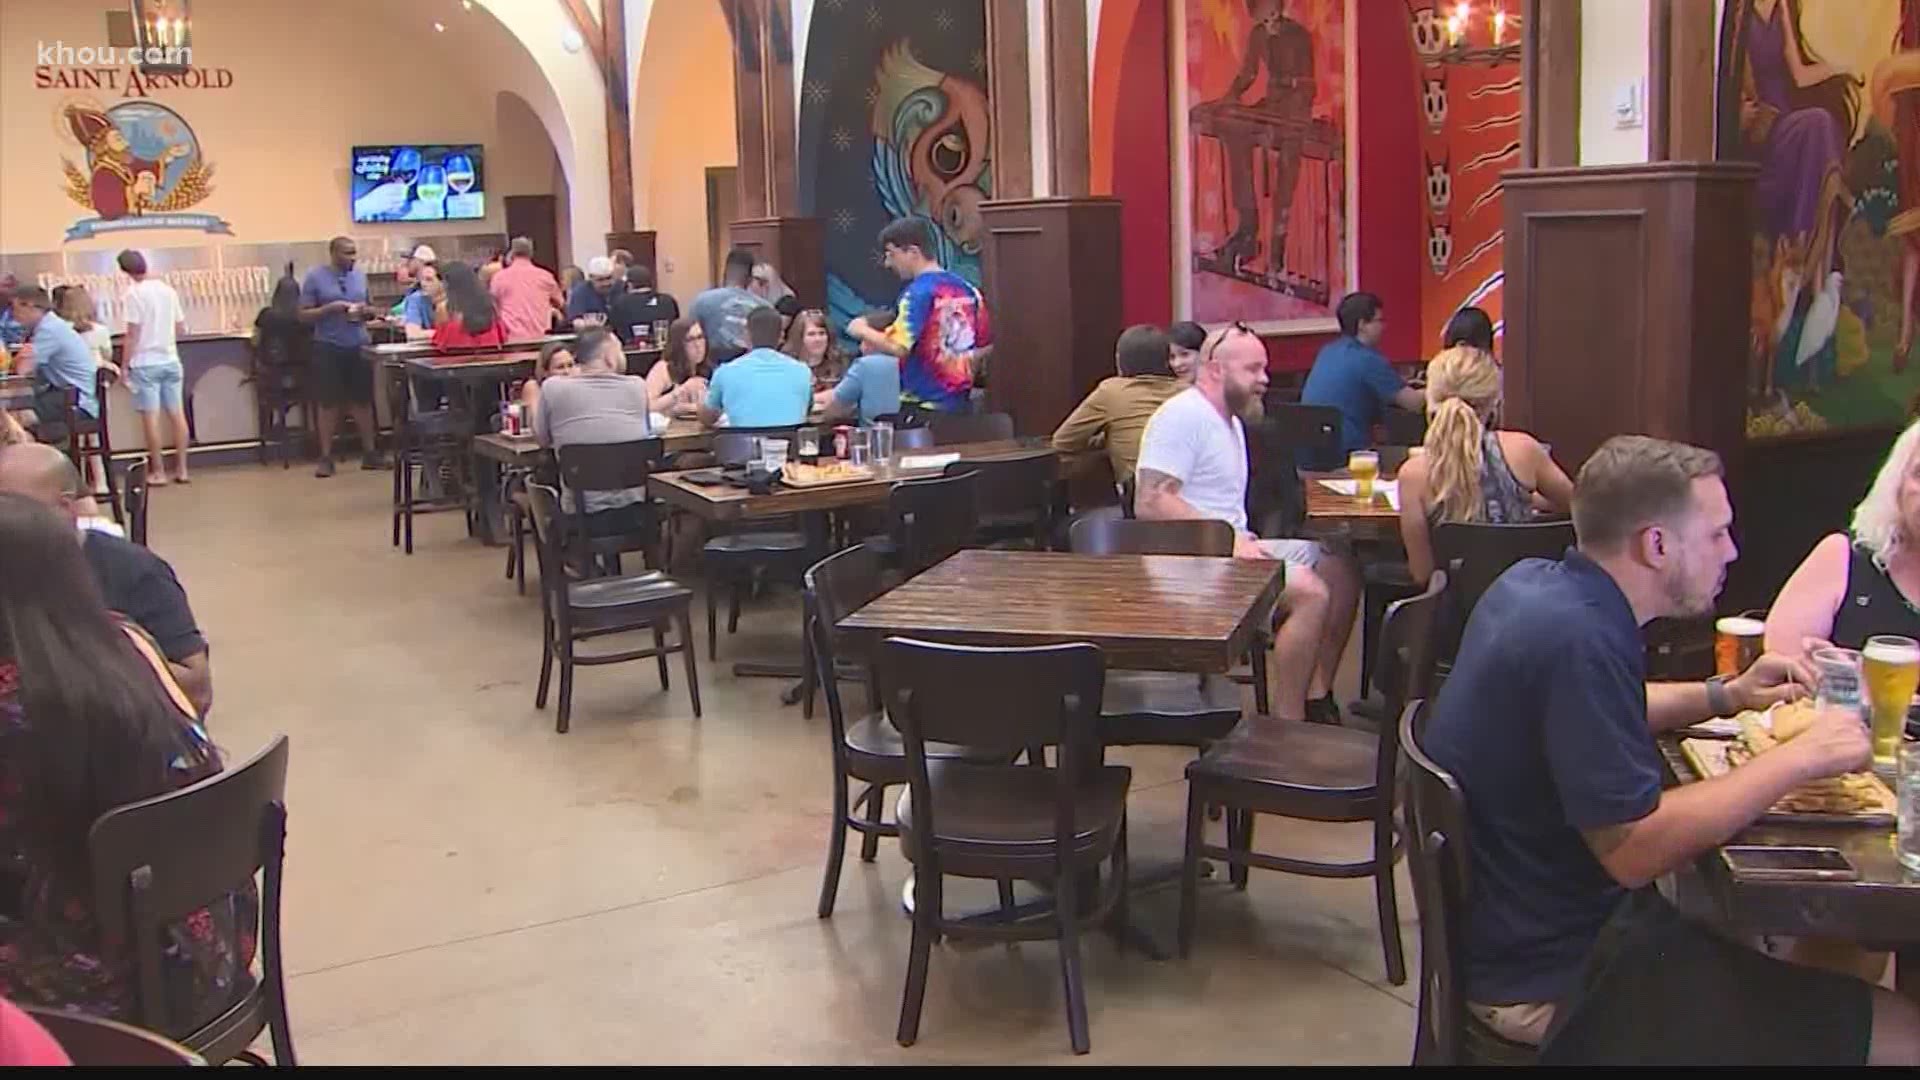 The Saint Arnold Beer Garden & Restaurant said it has to cut 75 jobs & only offer to-go orders since Texas abruptly changed how it categorizes brewery-restauraunts.